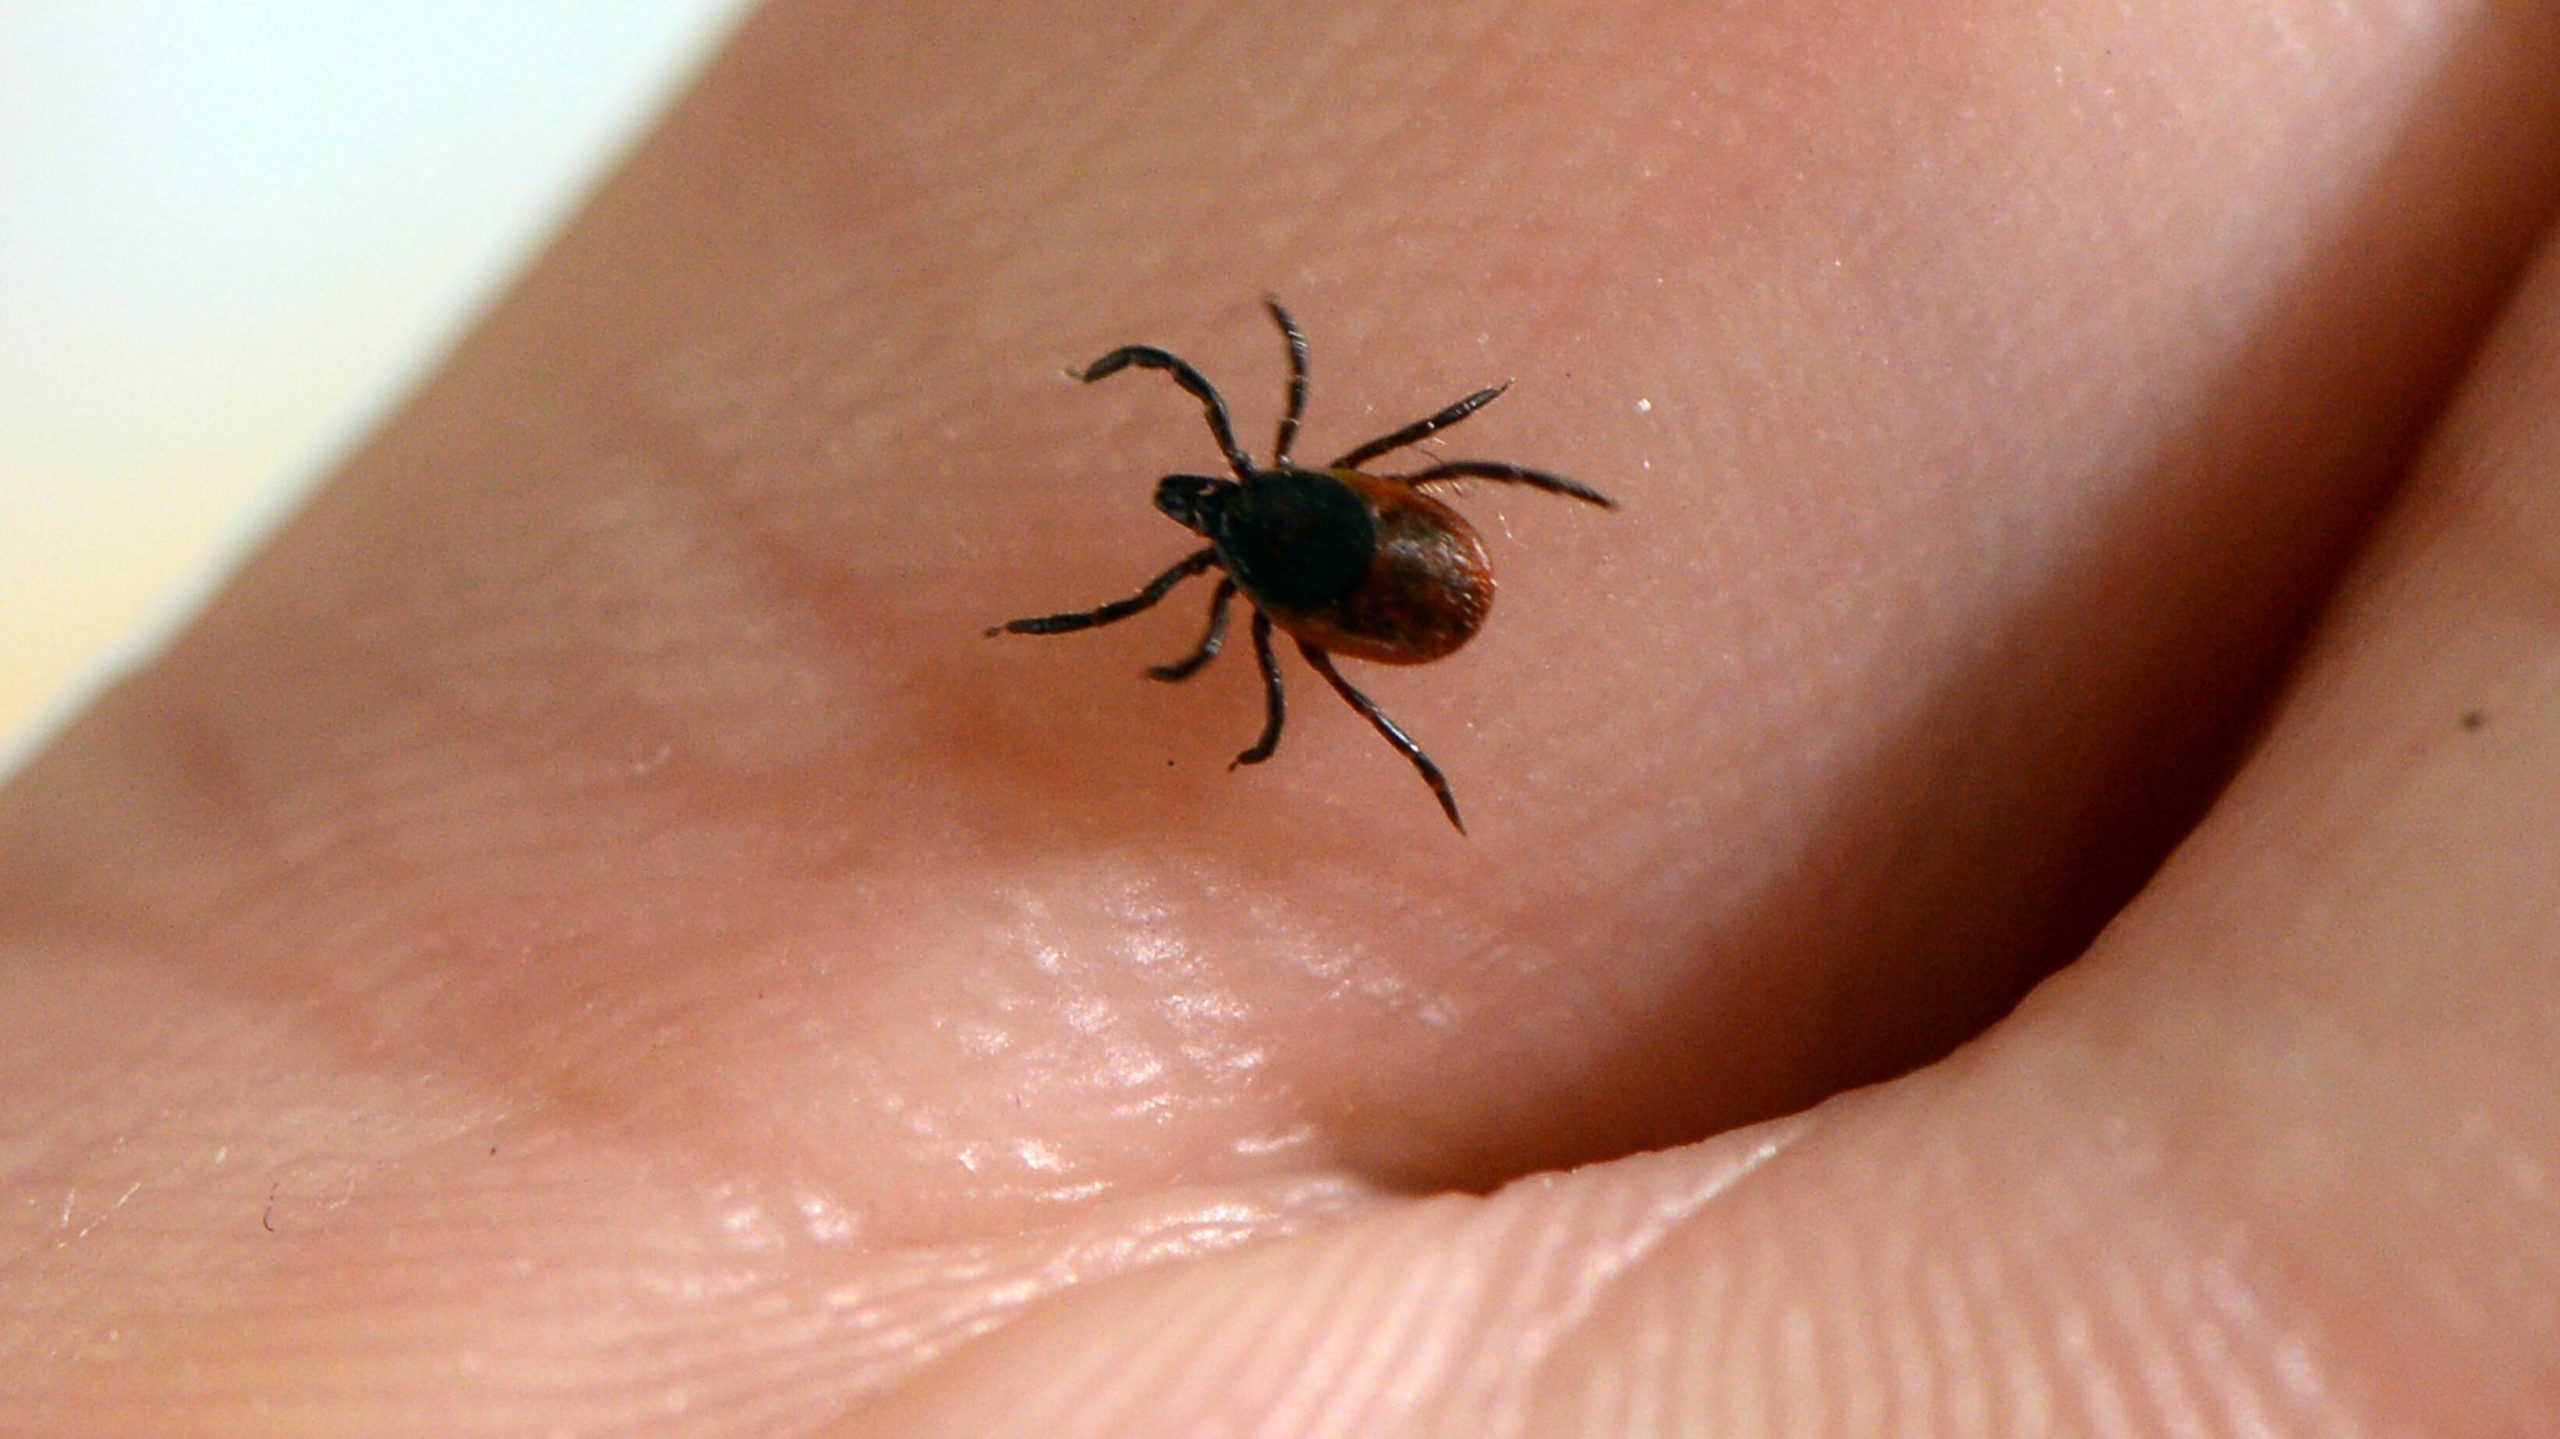 It has been claimed that the Animal Disease Center is using ticks as a weapon to transmit Lyme disease